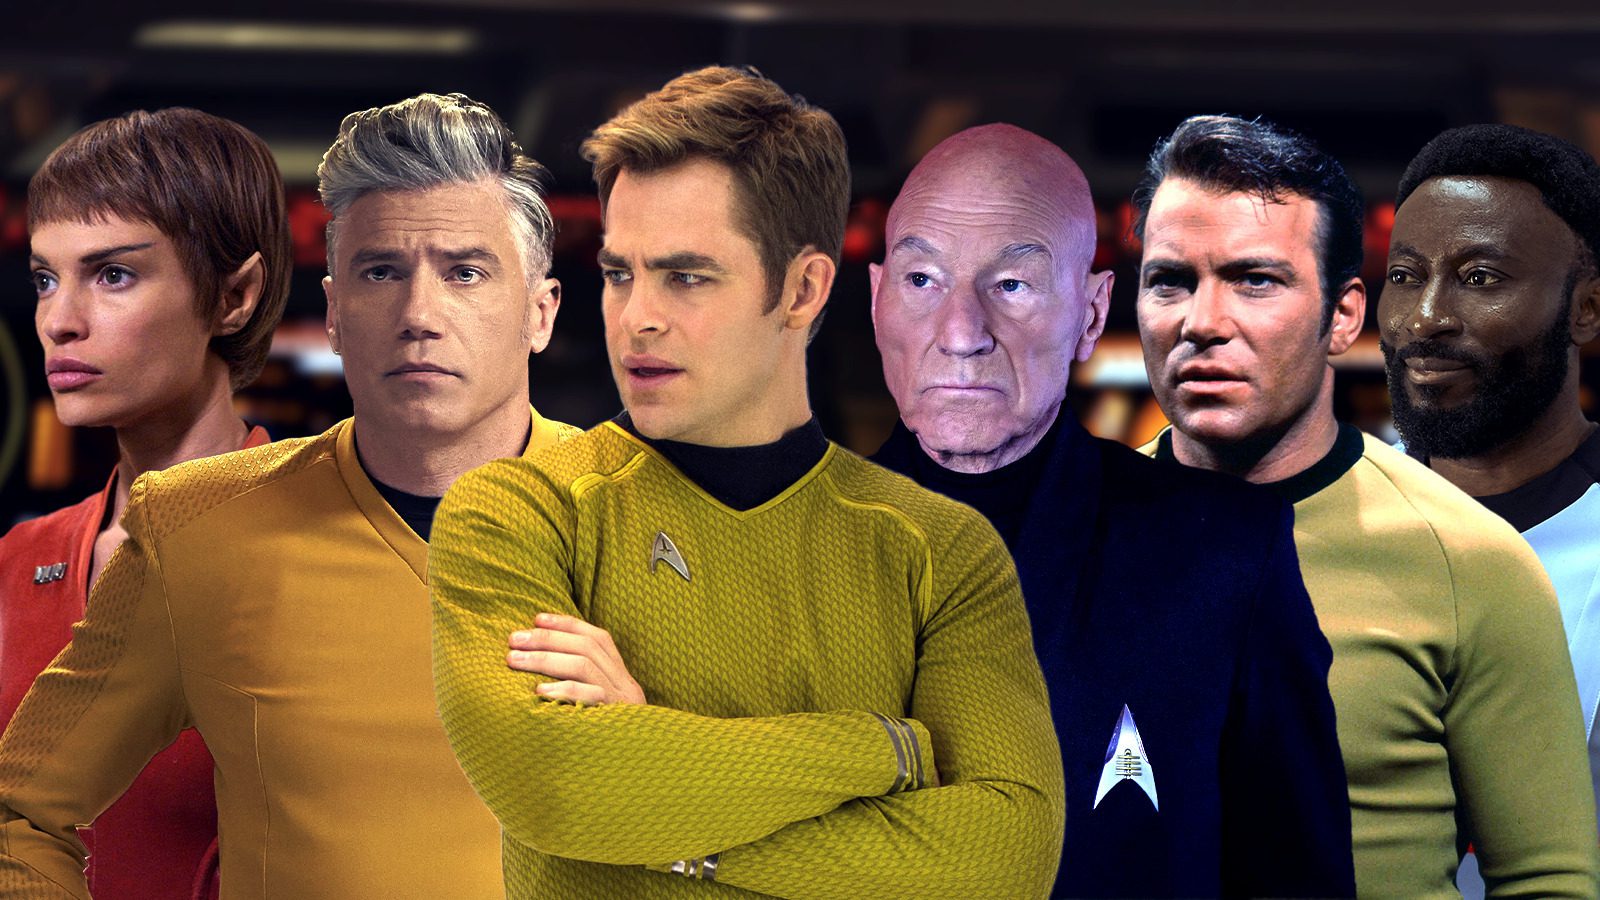 The Next Star Trek Movie Should Boldly Go Where The MCU Has Gone Before